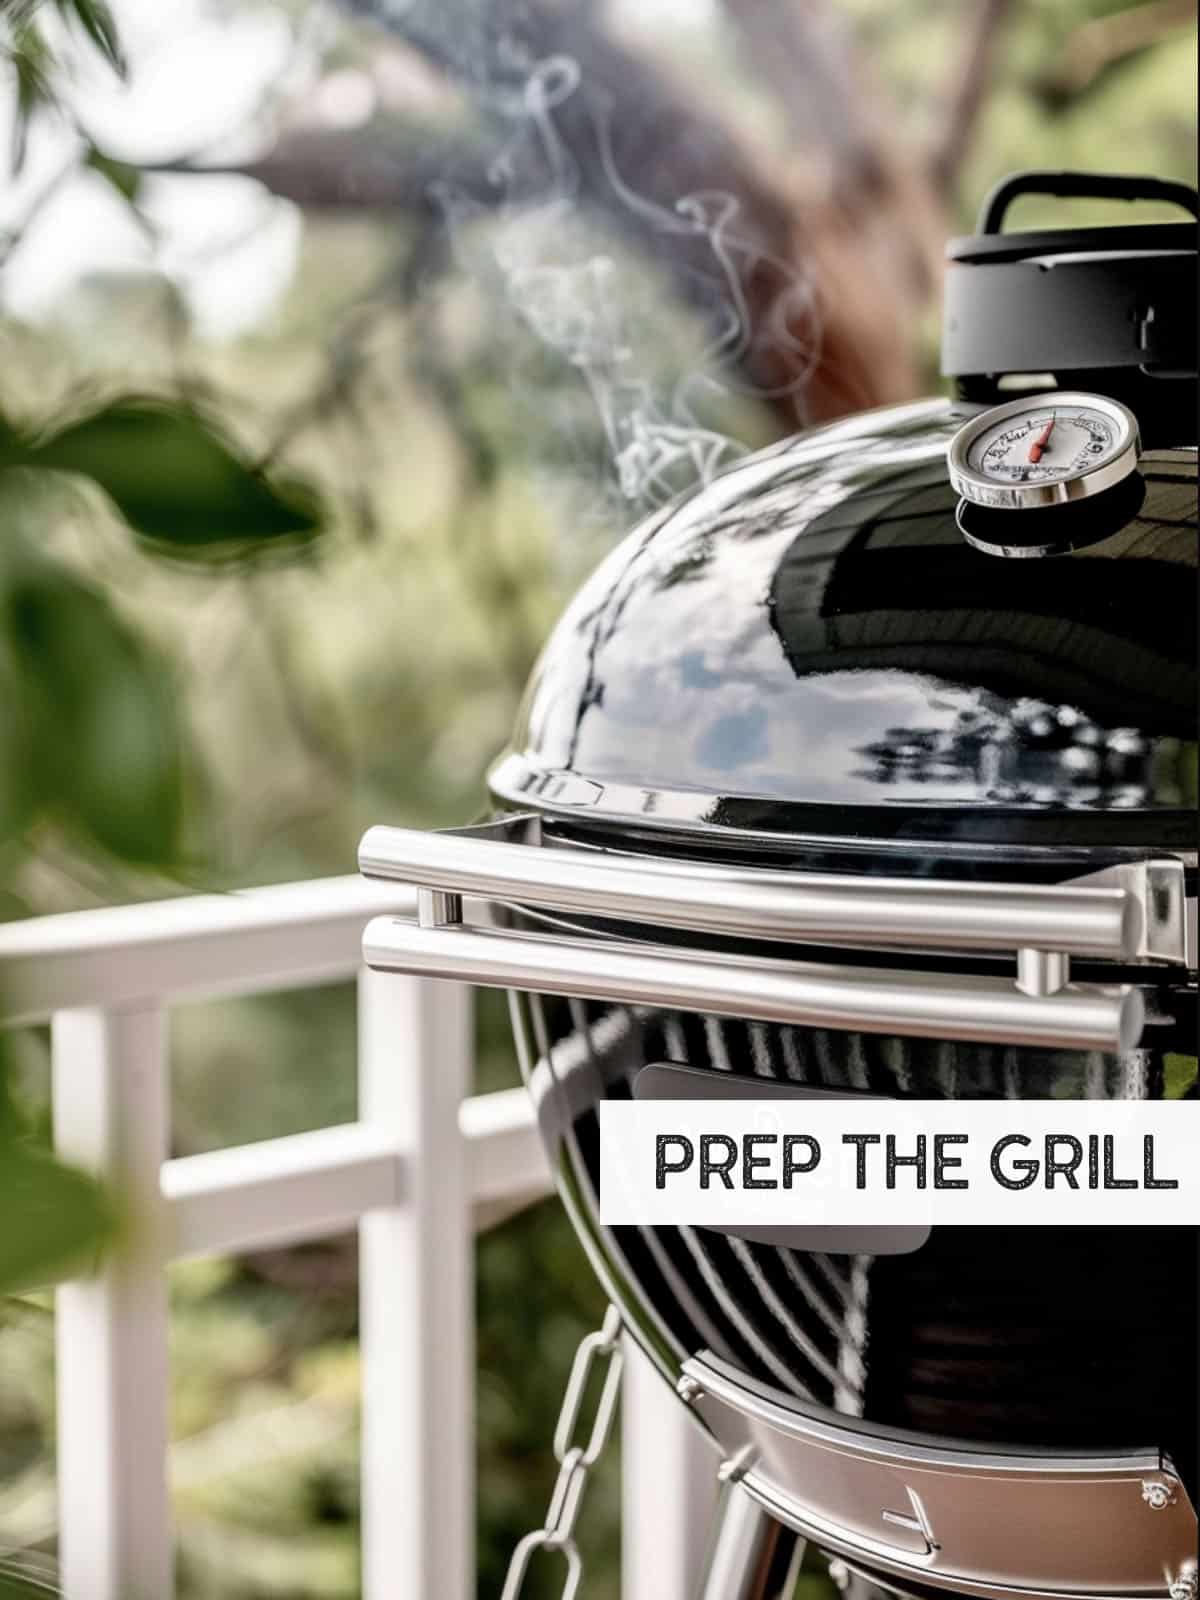 Hot, preheated grill with charcoal arranged for direct and indirect cooking, ready for salmon